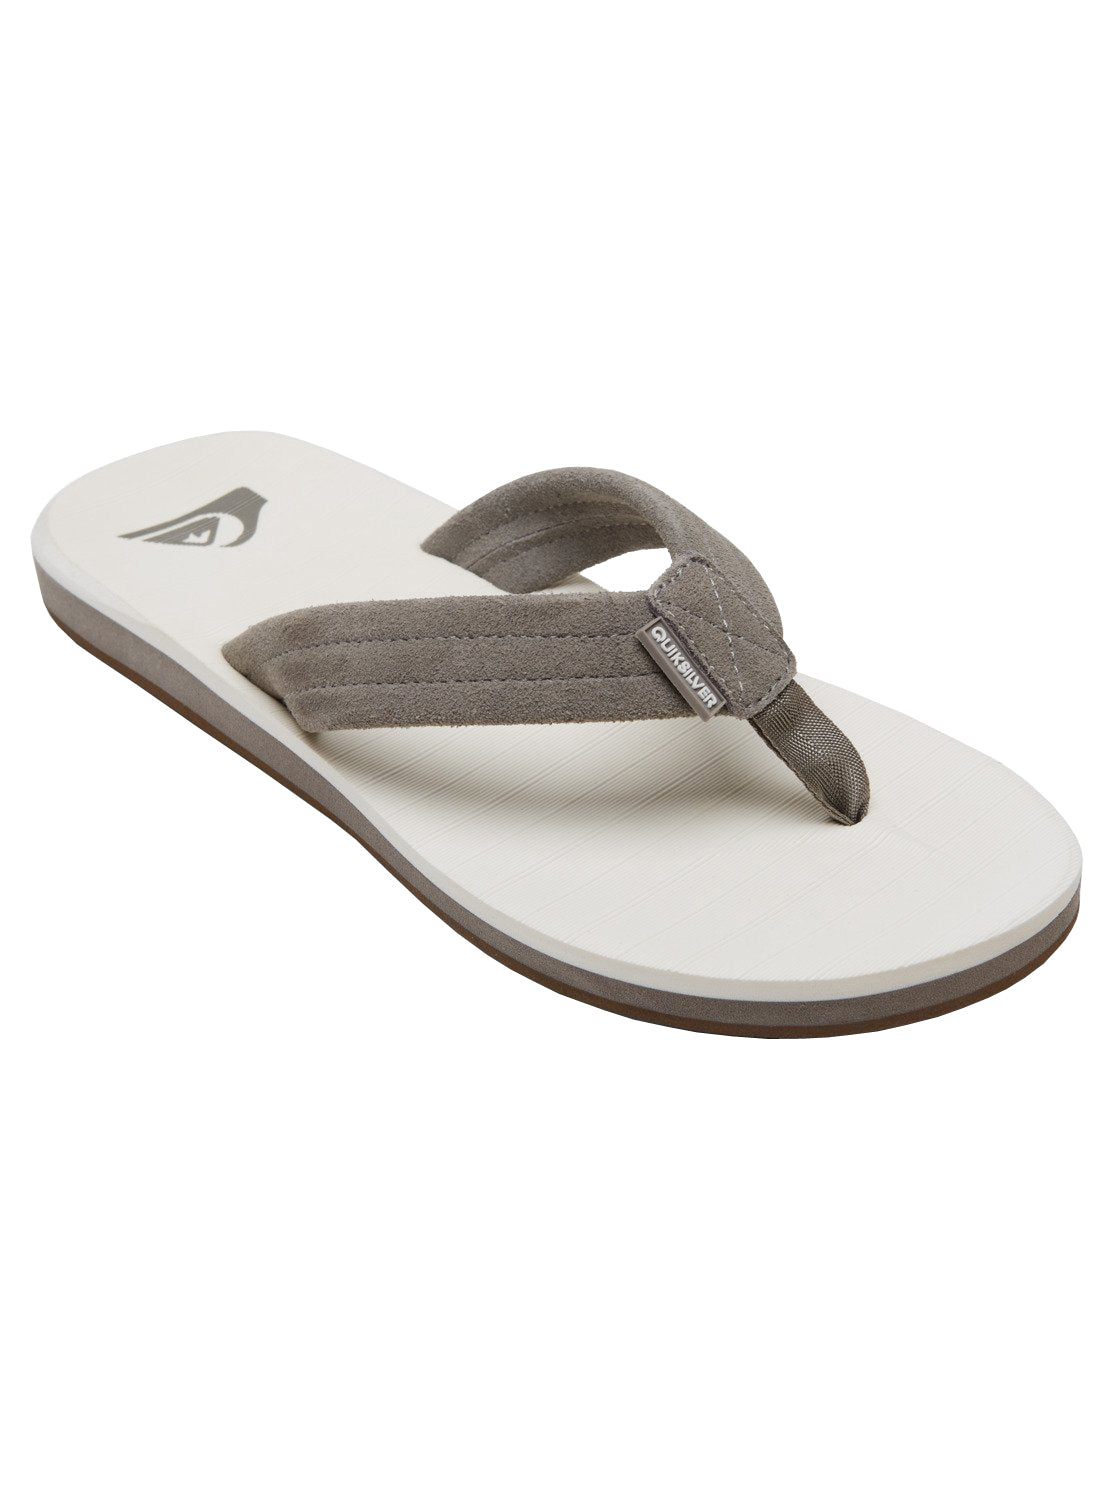 Quiksilver Carver Suede Mens Sandal XSWS-Grey-White-Grey 9